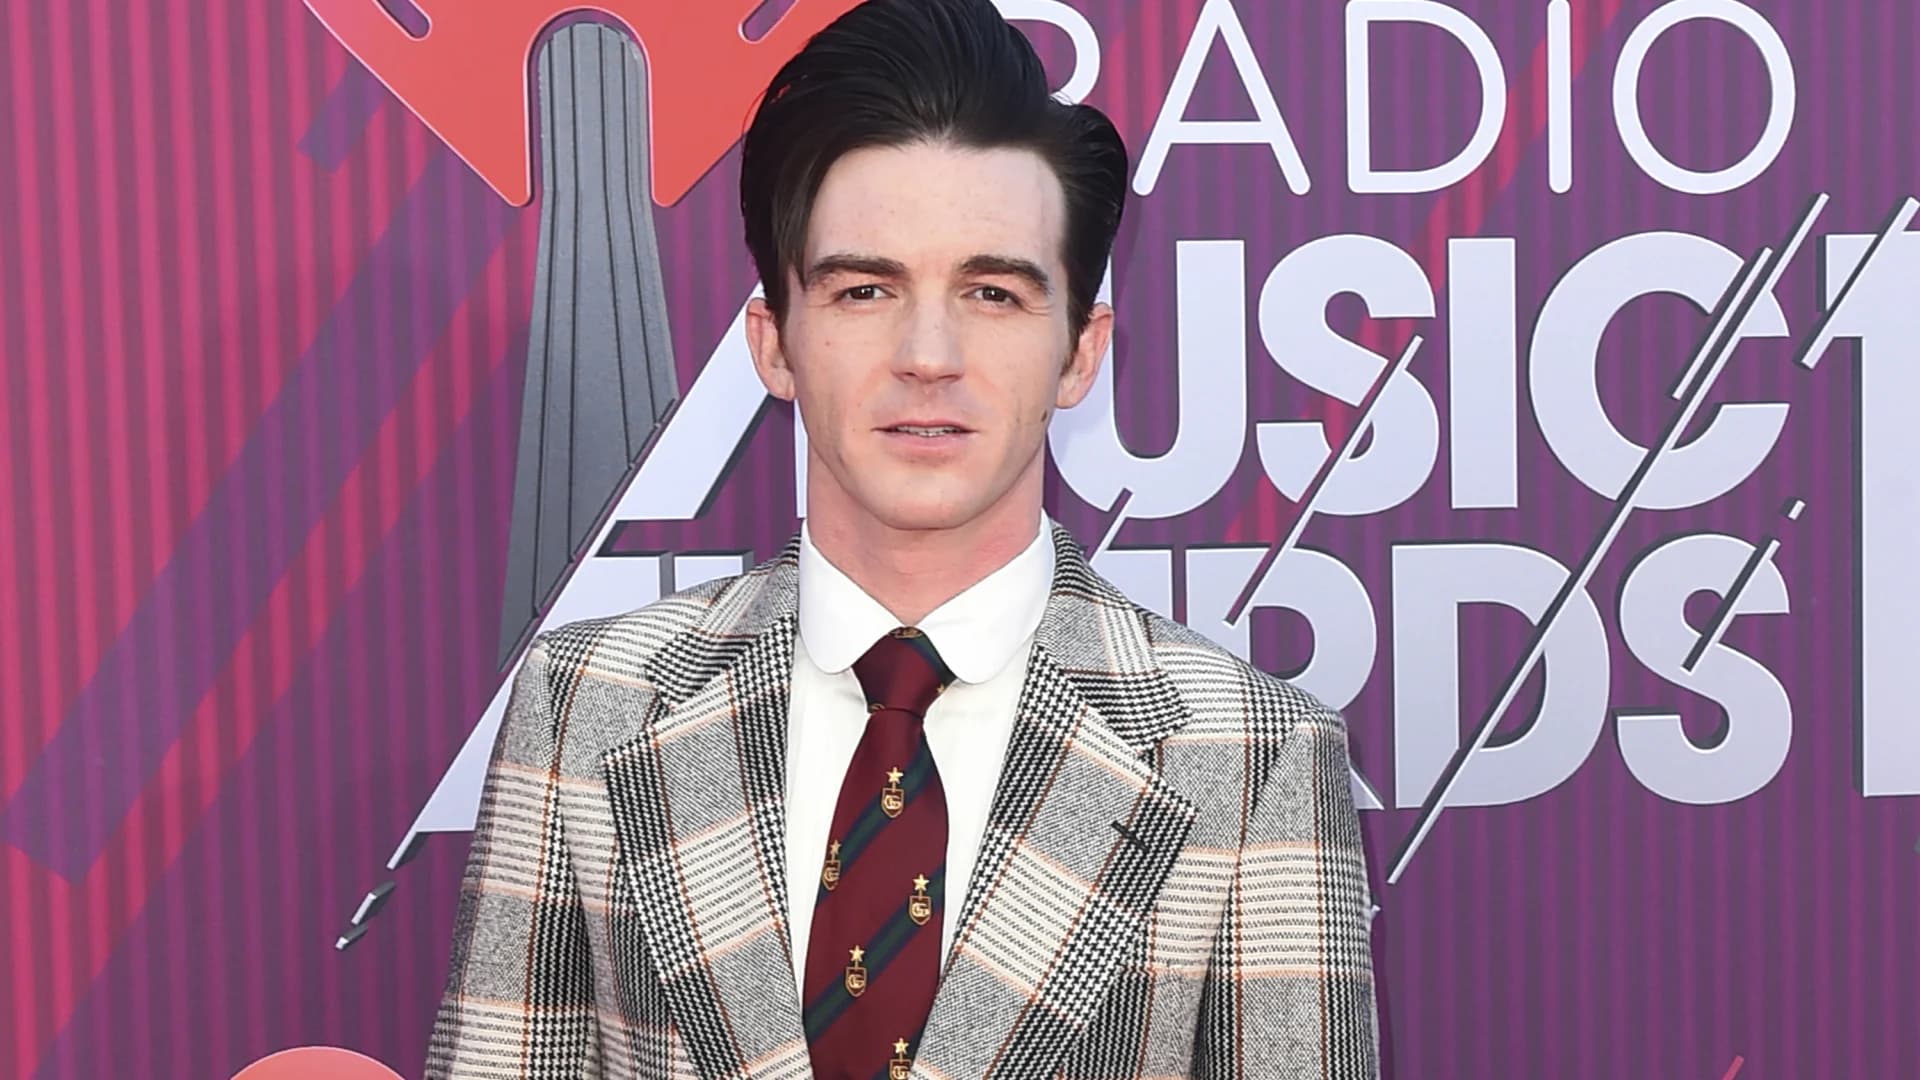 Ex-child actor Drake Bell accused of child endangerment